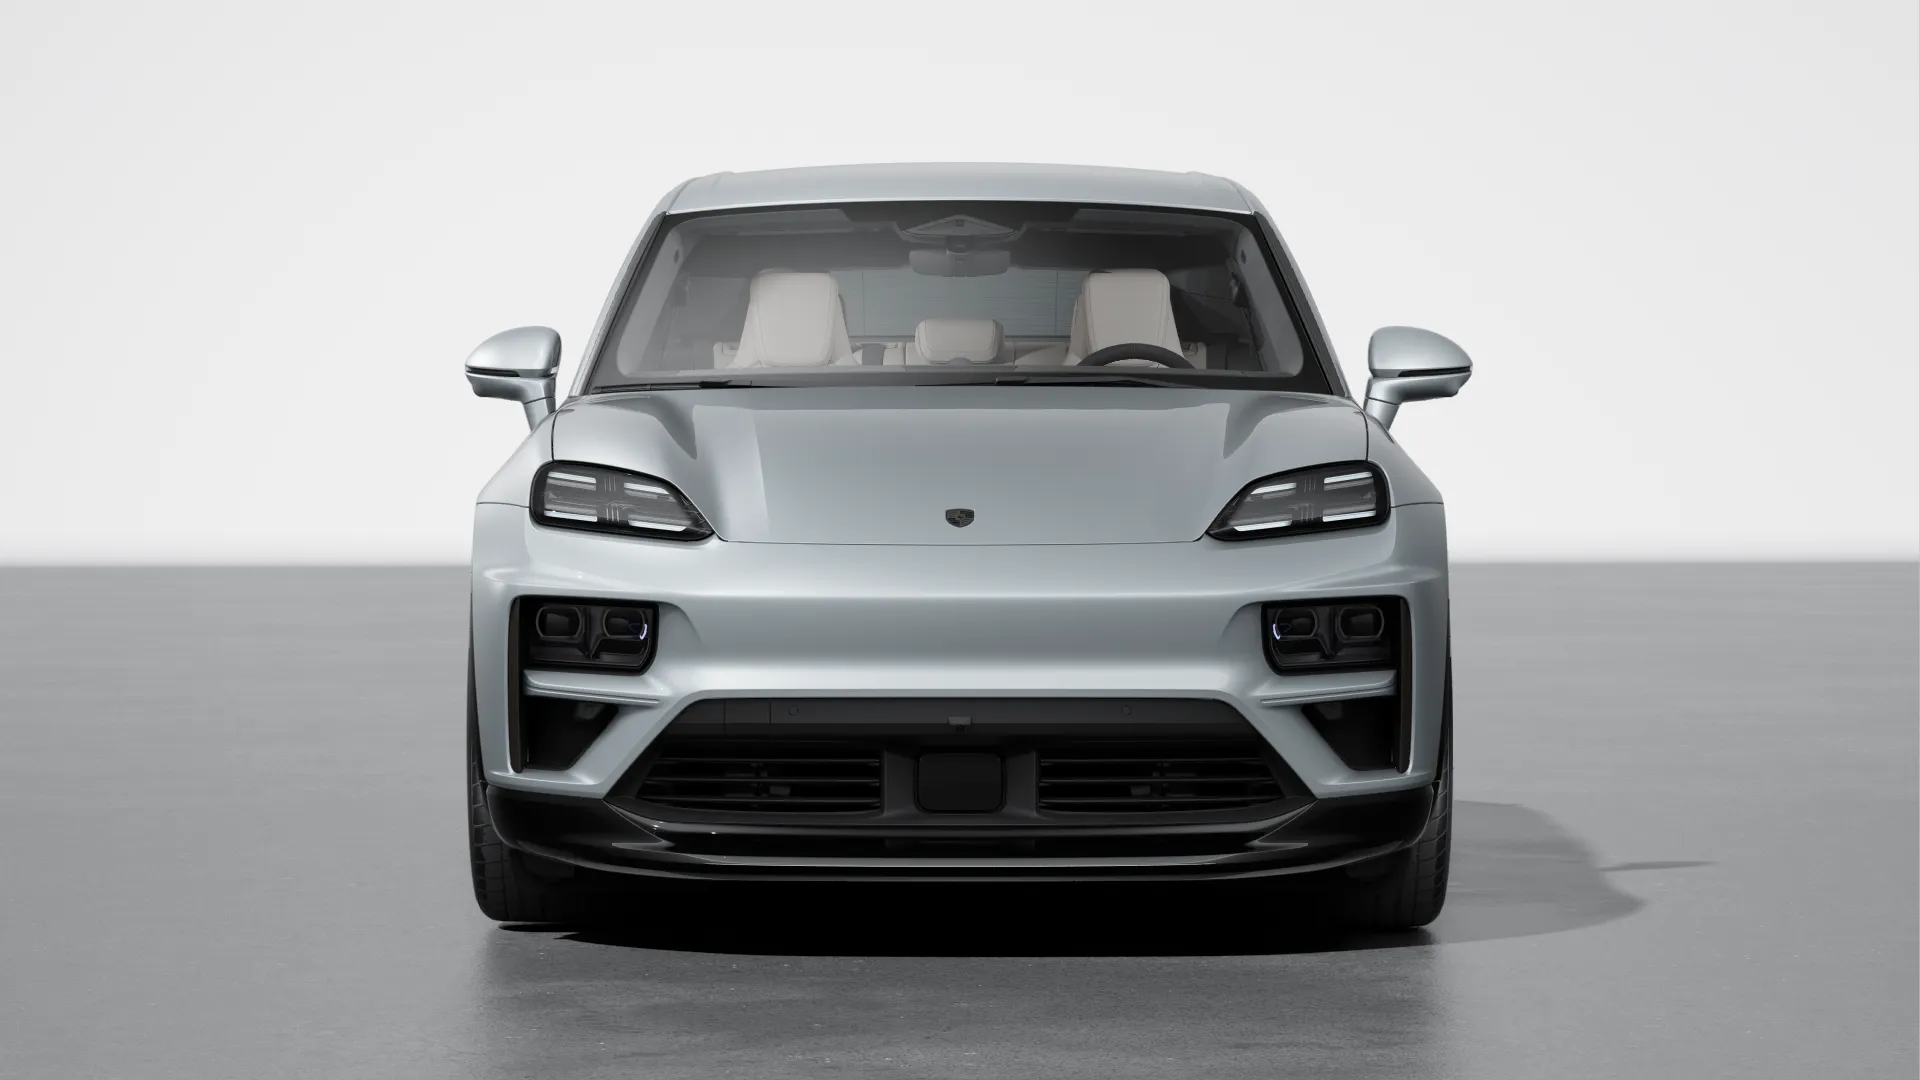 Exterior view of Macan Turbo Electric